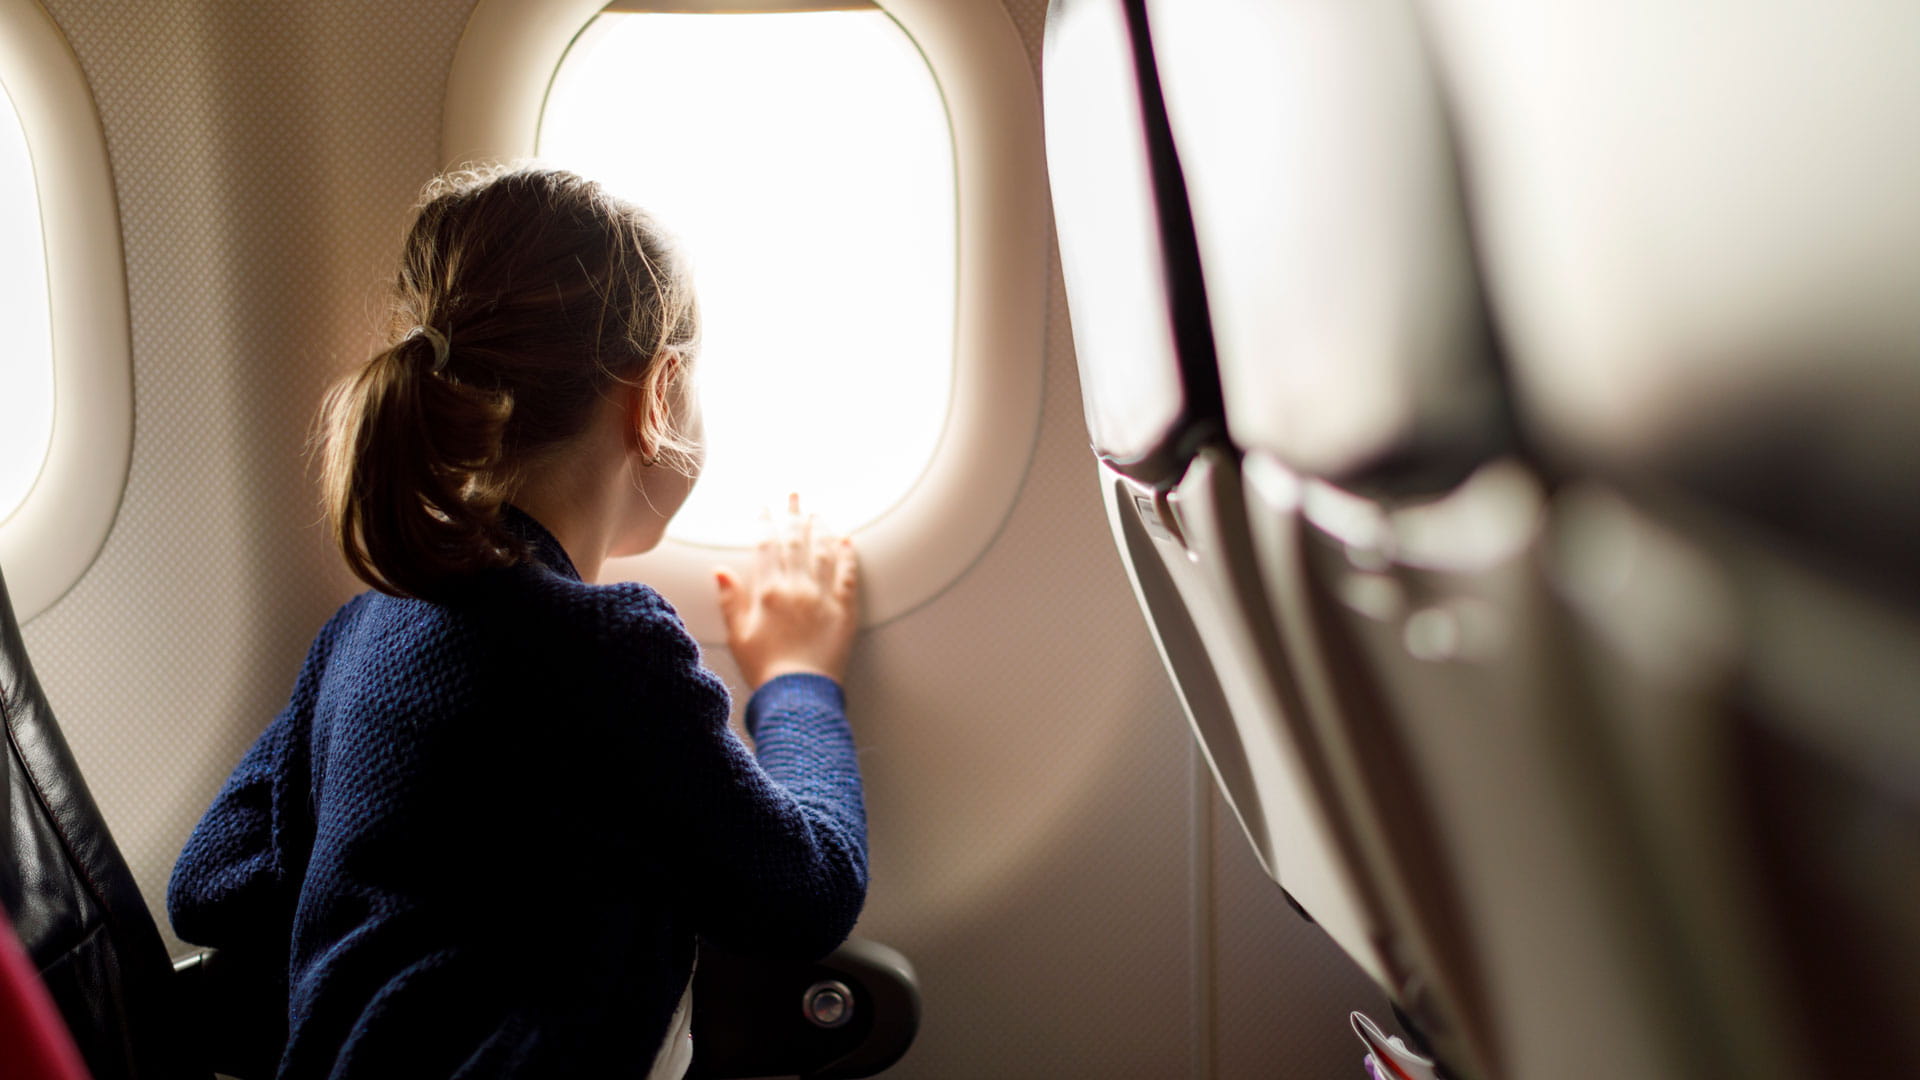 A girl looks out the window of an airplane